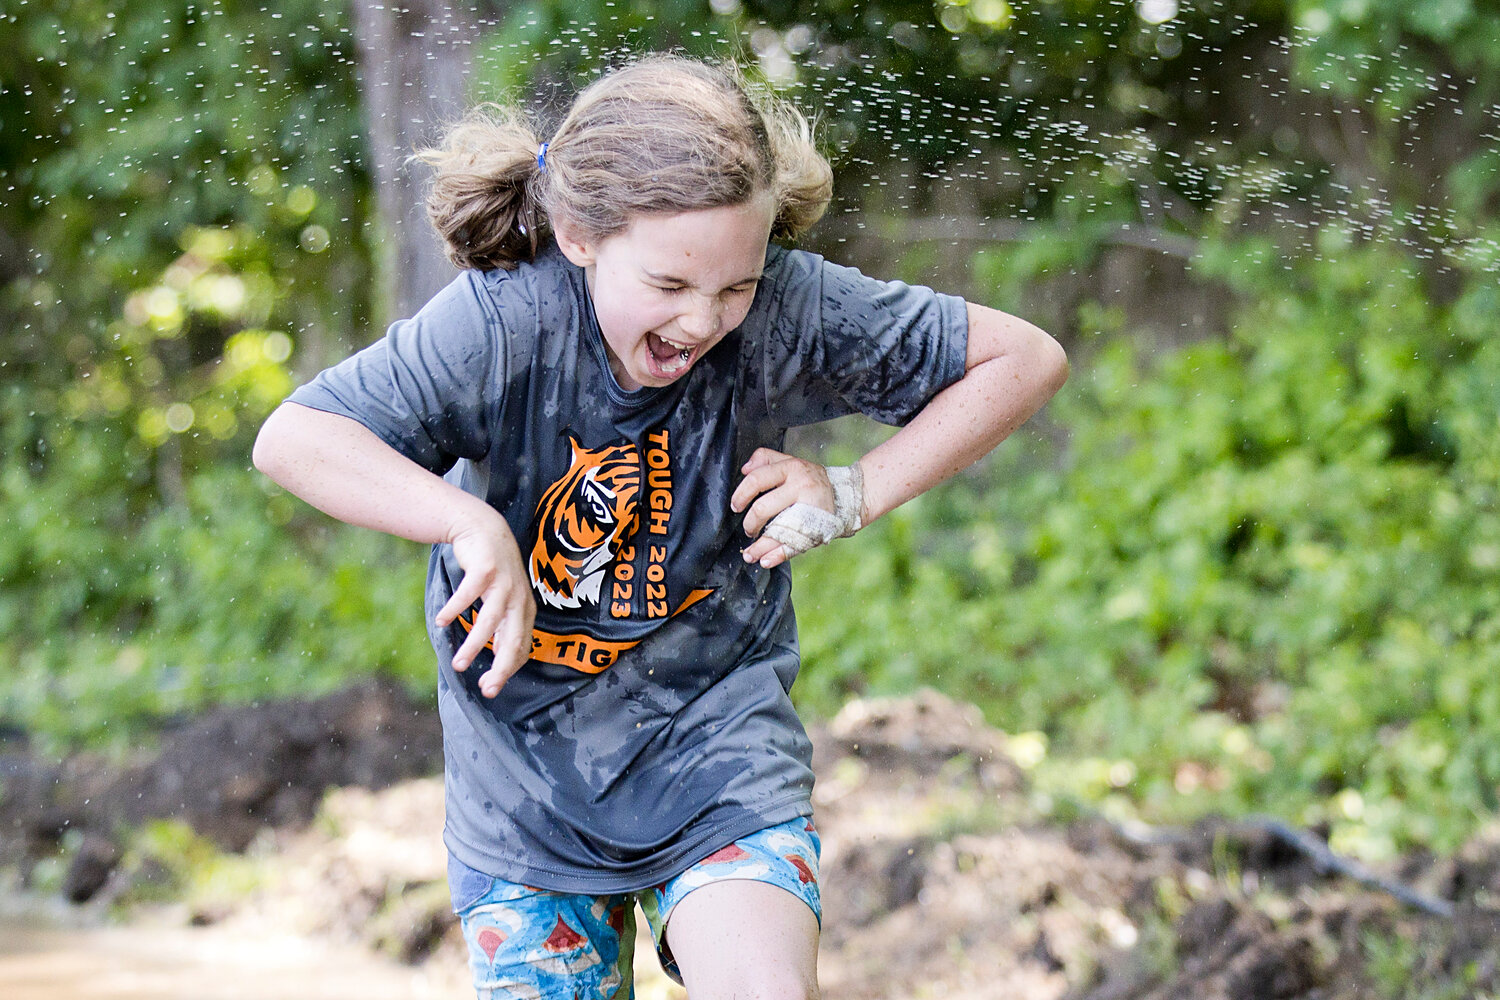 A young competitor reacts to an unsuspected sprinkler while racing through a mud obstacle.